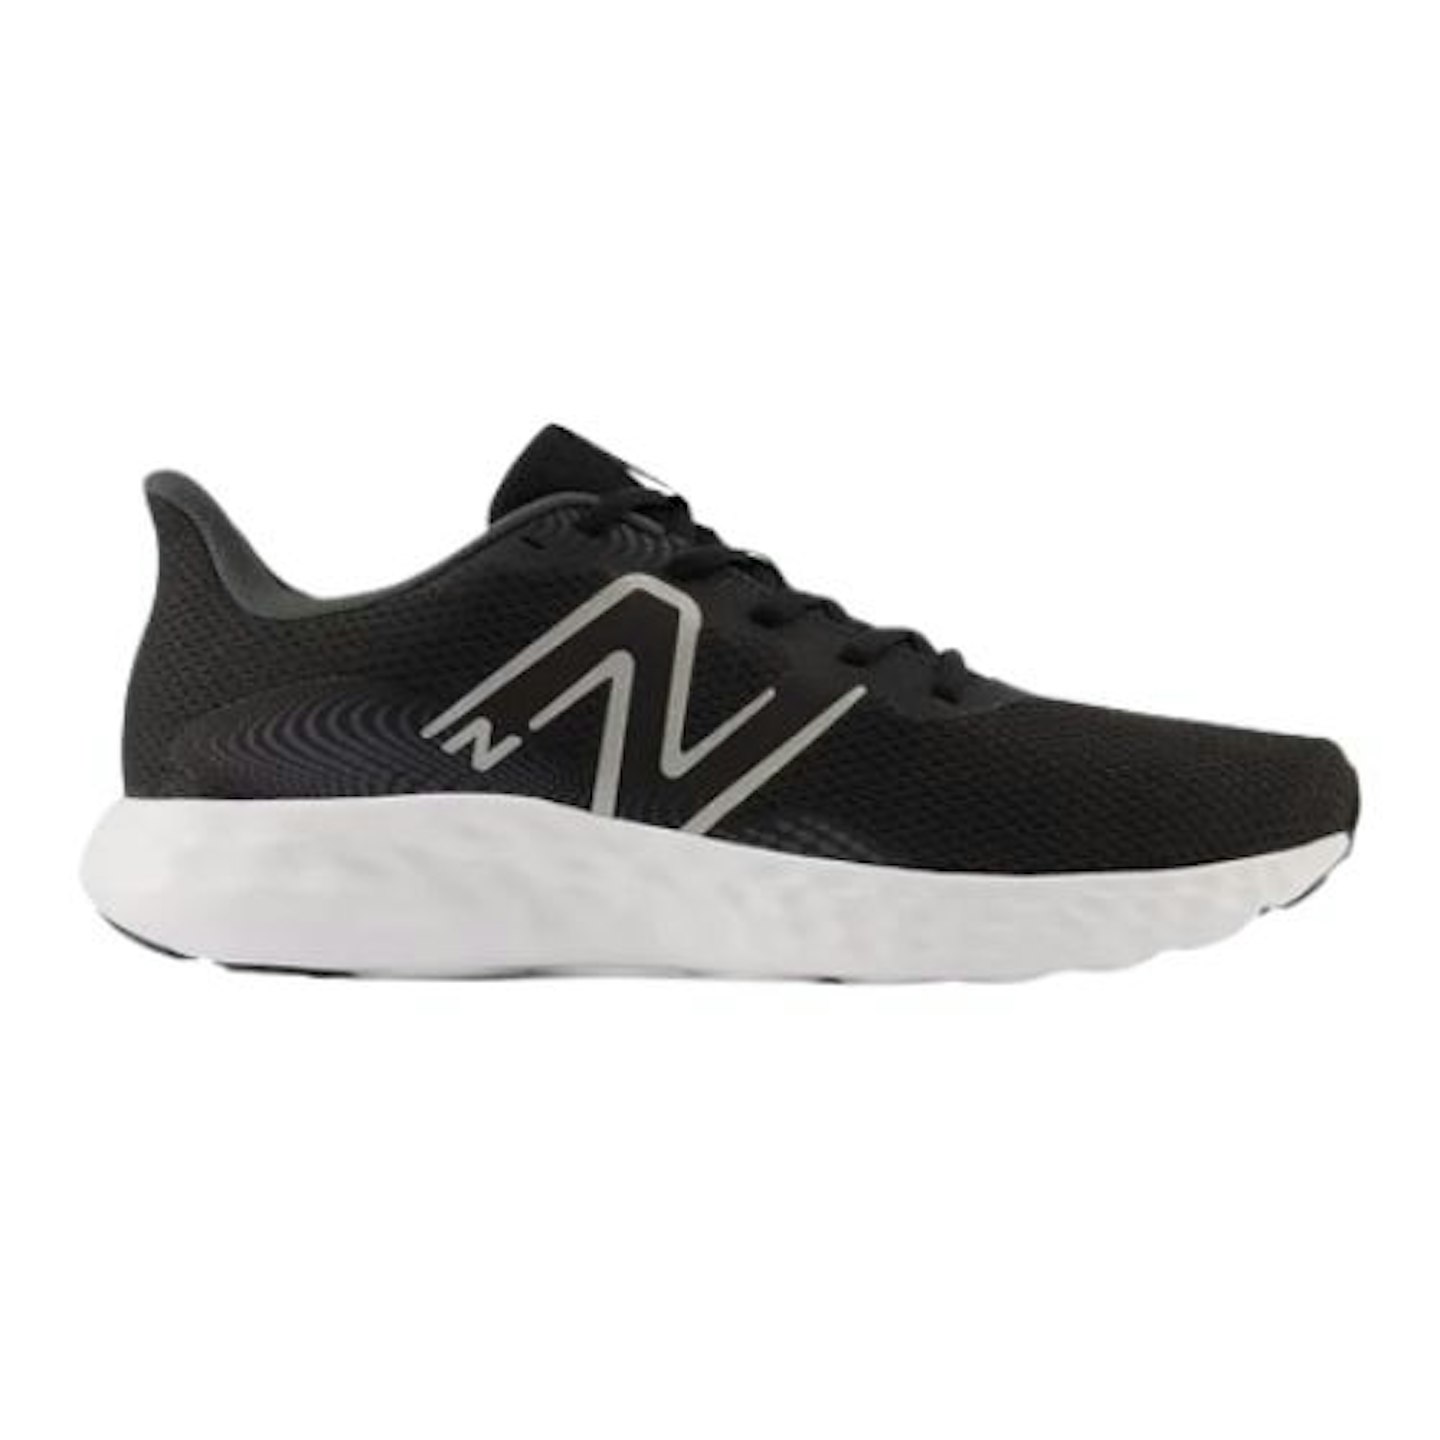 New Balance M411LB3 Walking and Running Trainers